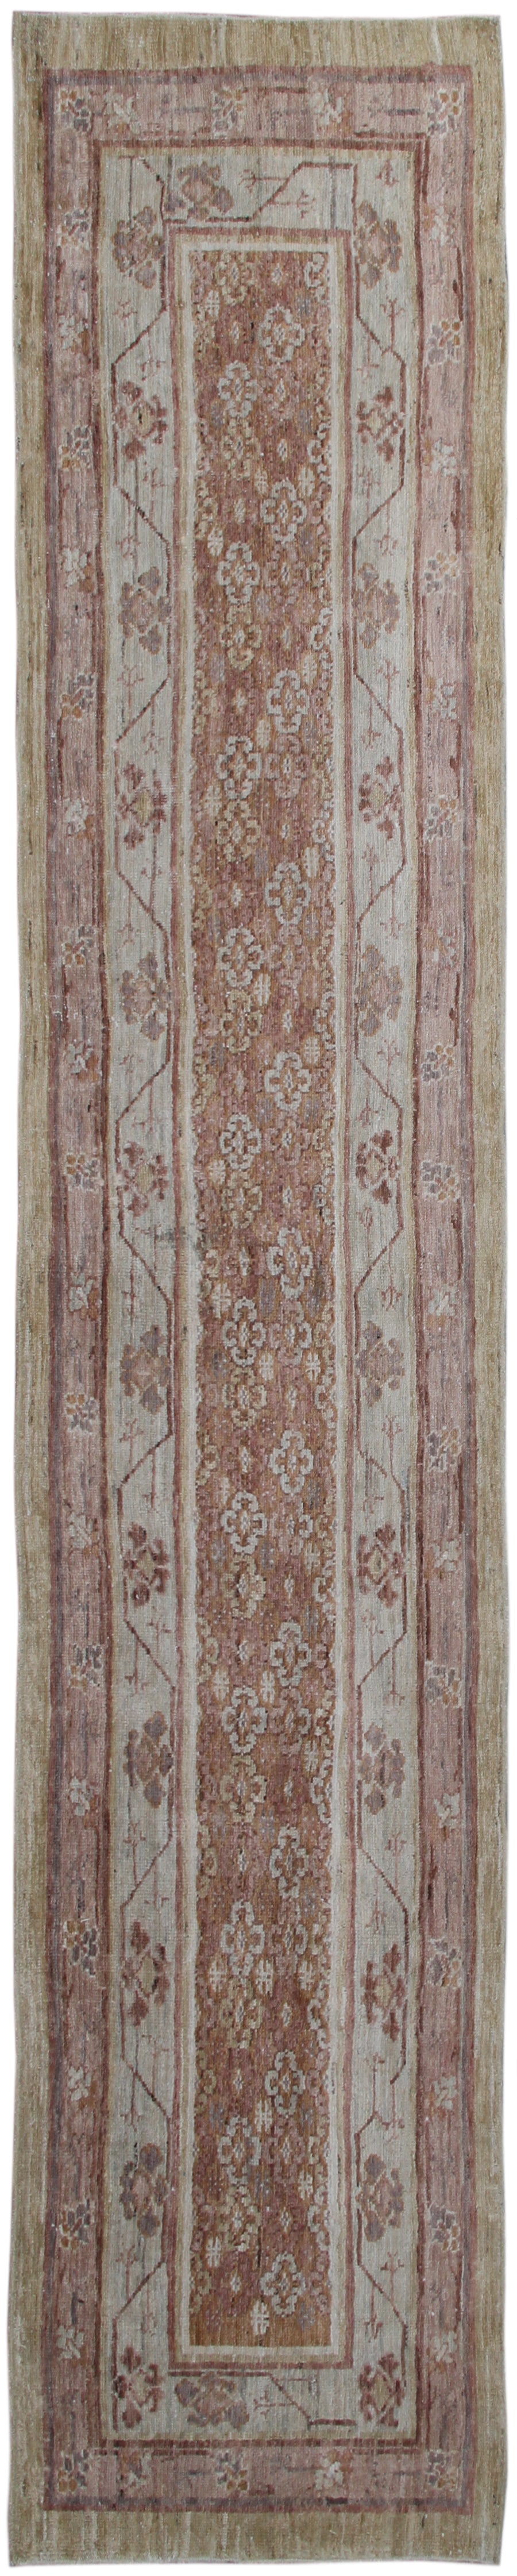 2'x11' Hand-Knotted Fine Quality Ariana Traditional Runner